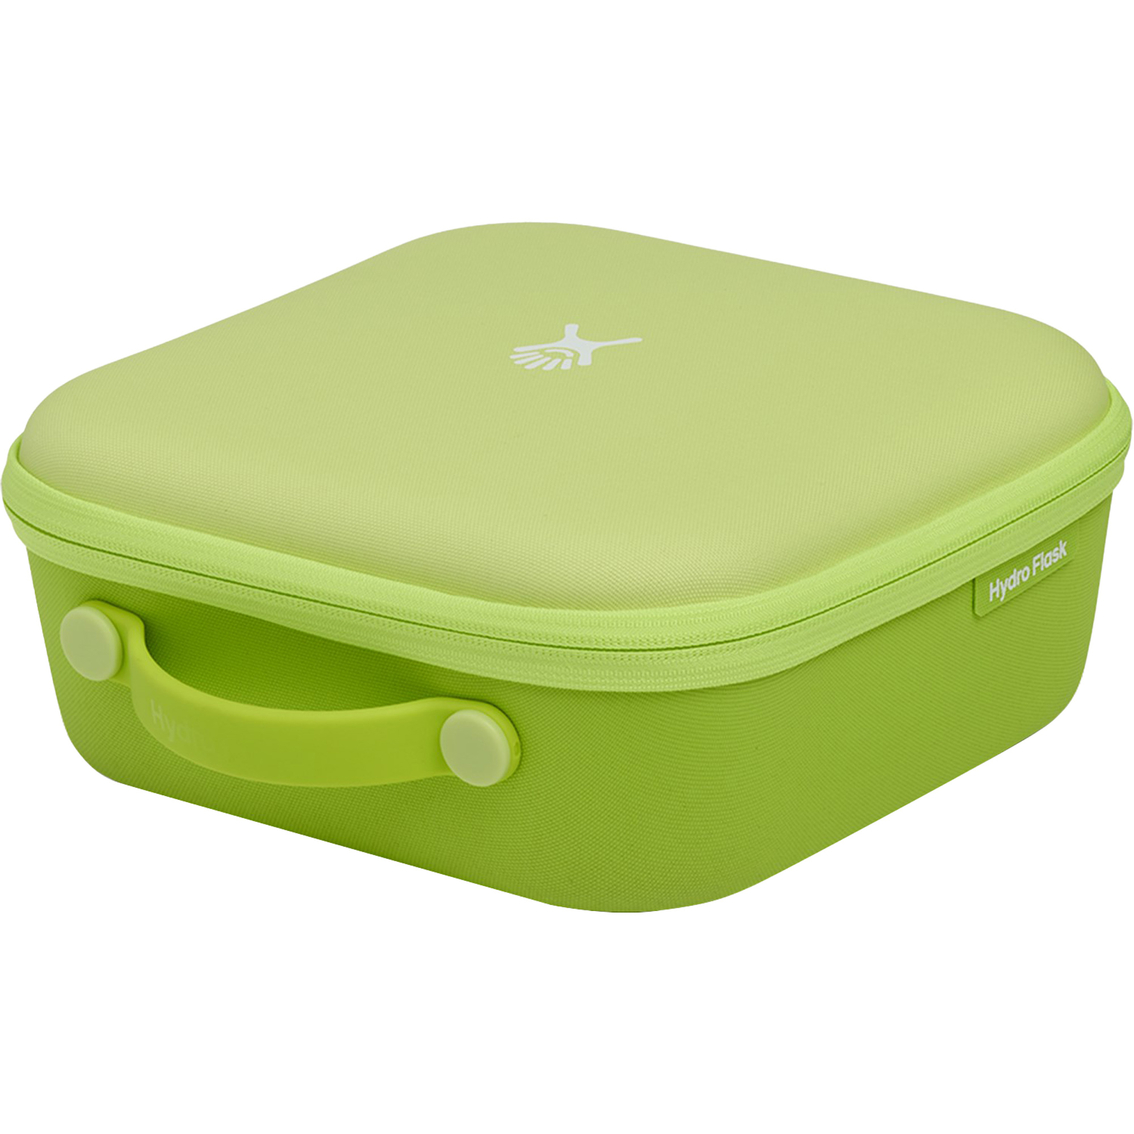 Hydro Flask Kids Small Insulated Lunch Box - Image 2 of 4